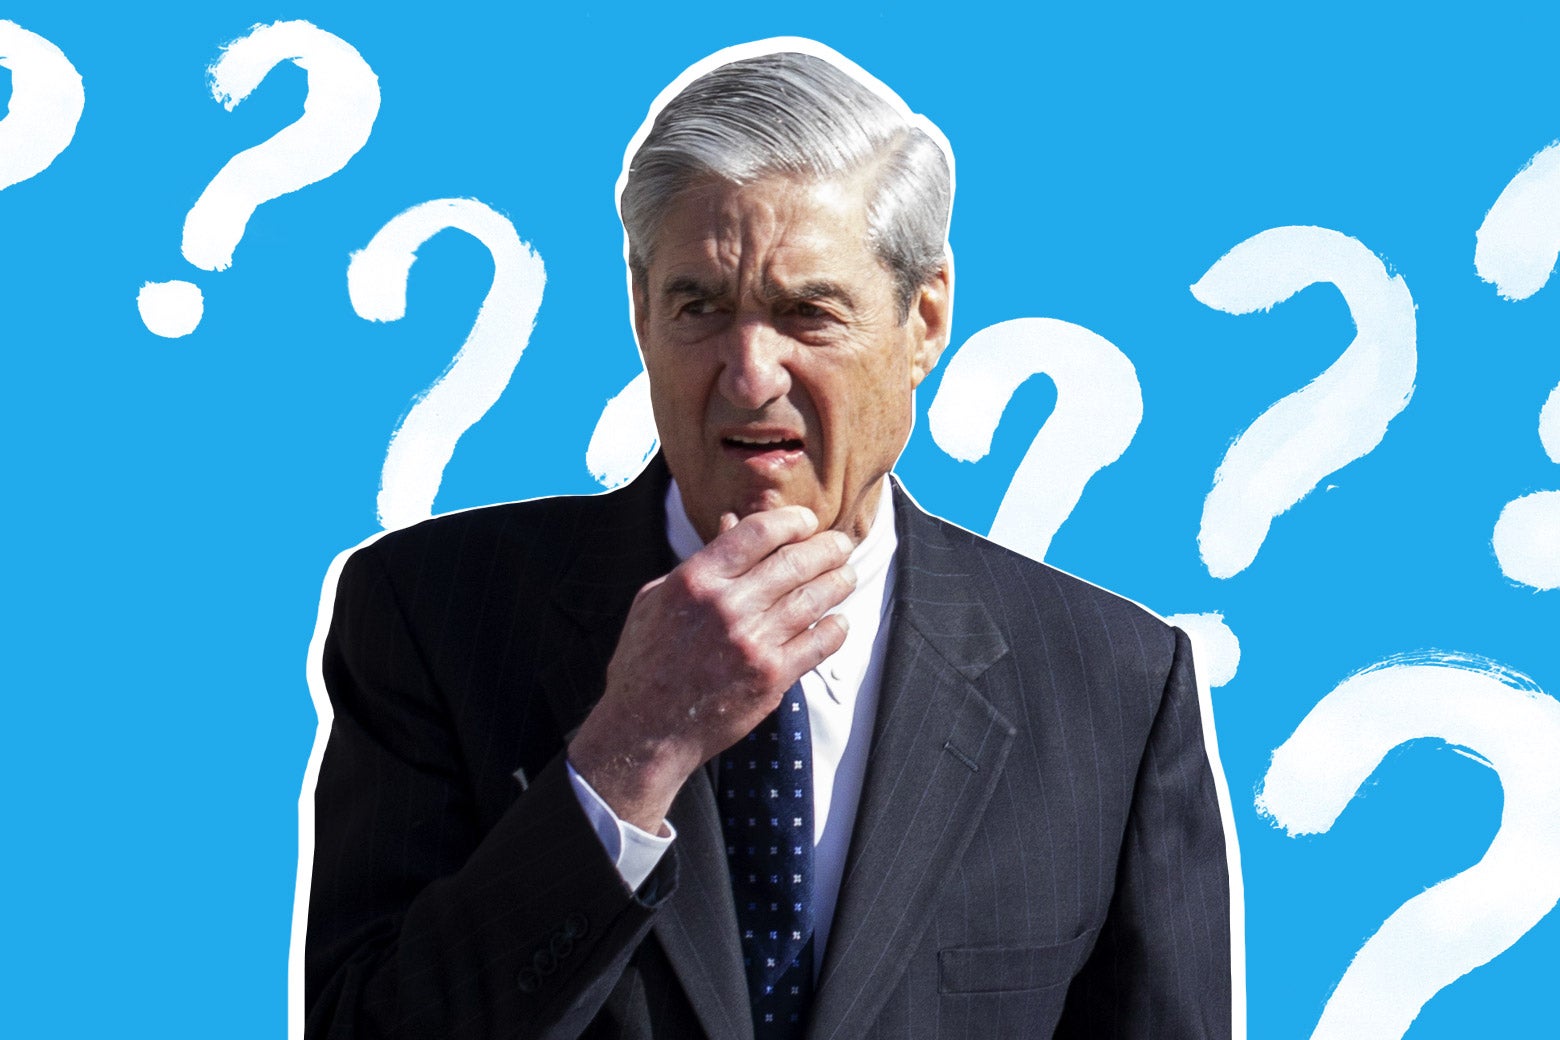 Robert Mueller touching his chin, looking puzzled, surrounded by question marks.